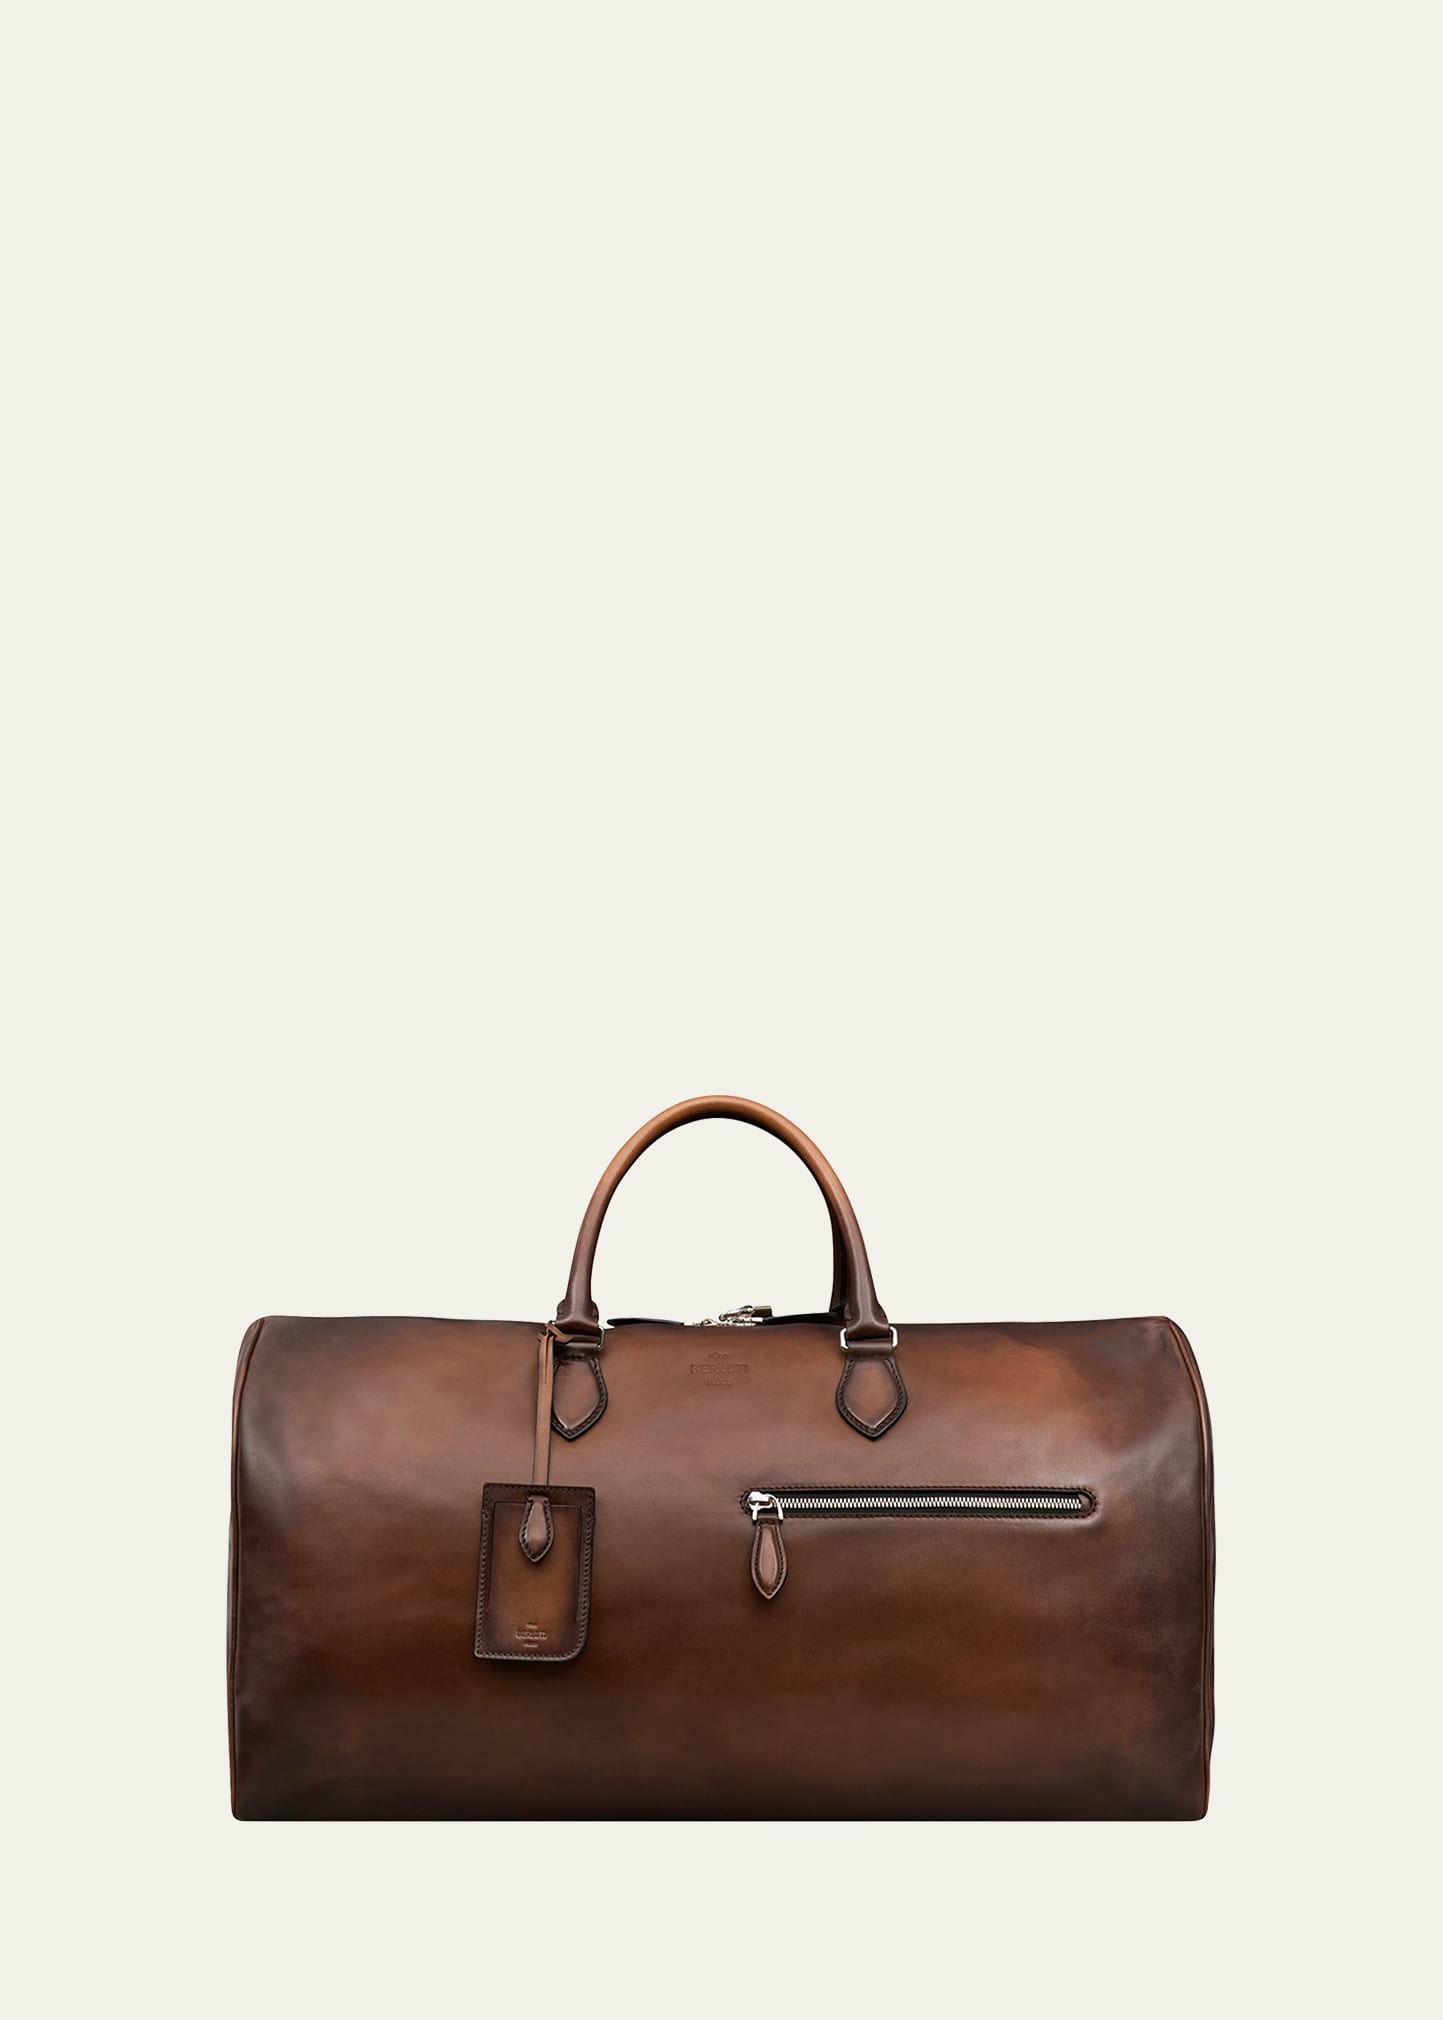 Berluti Men's Jour Off Leather Travel Bag, L In Cacao Intenso